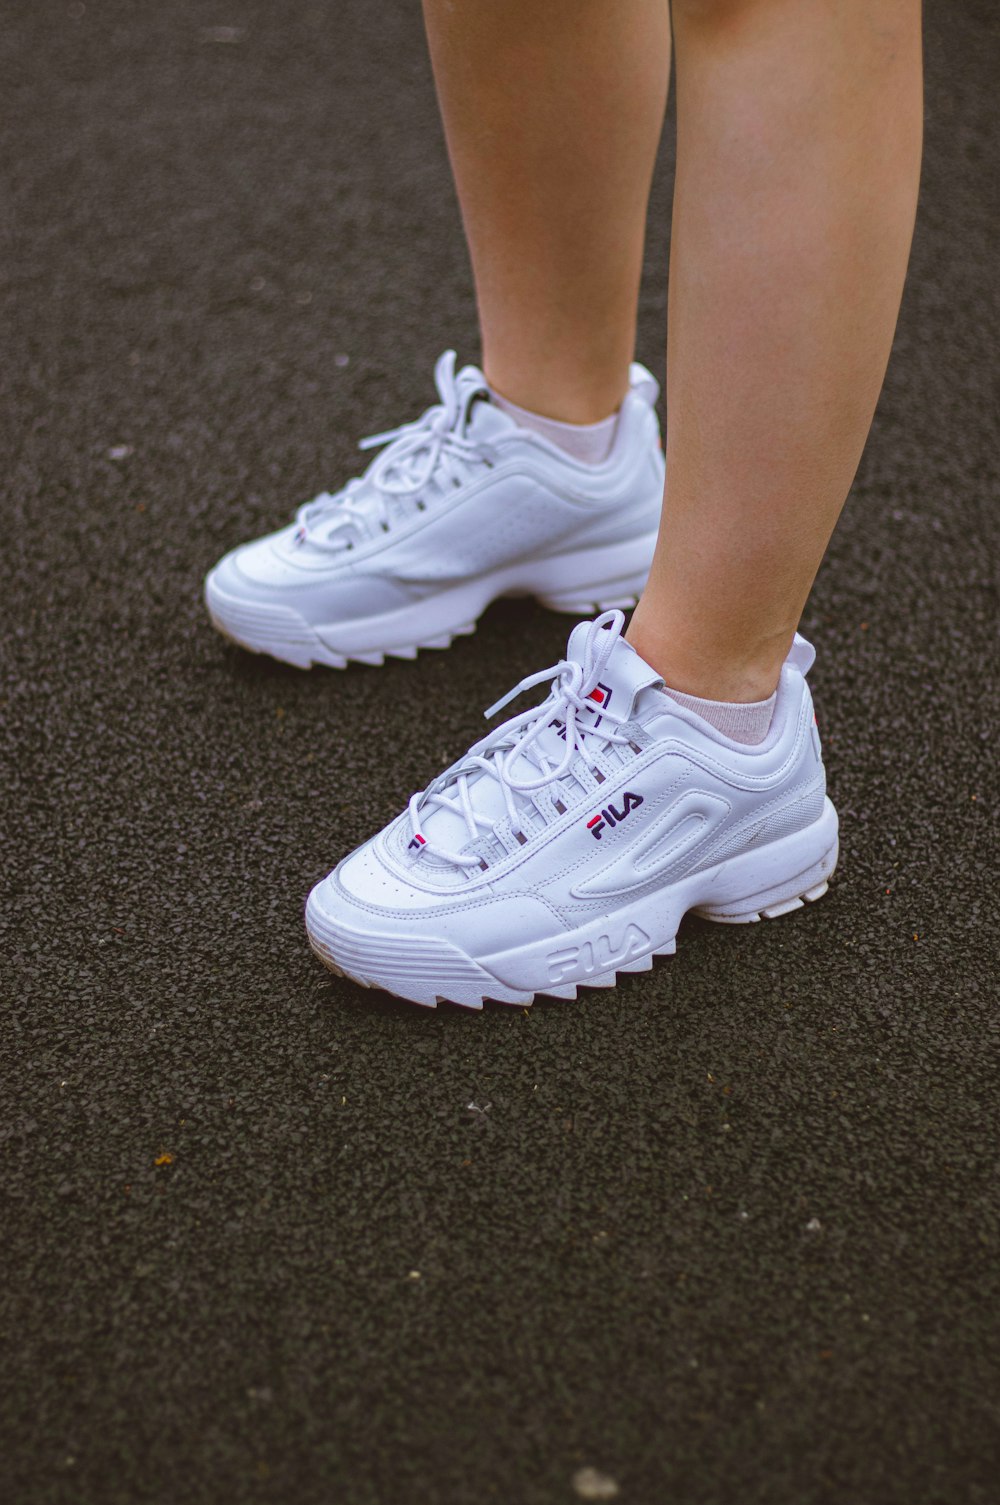 Person wearing white nike athletic shoes photo – Free Fila sneakers Image  on Unsplash